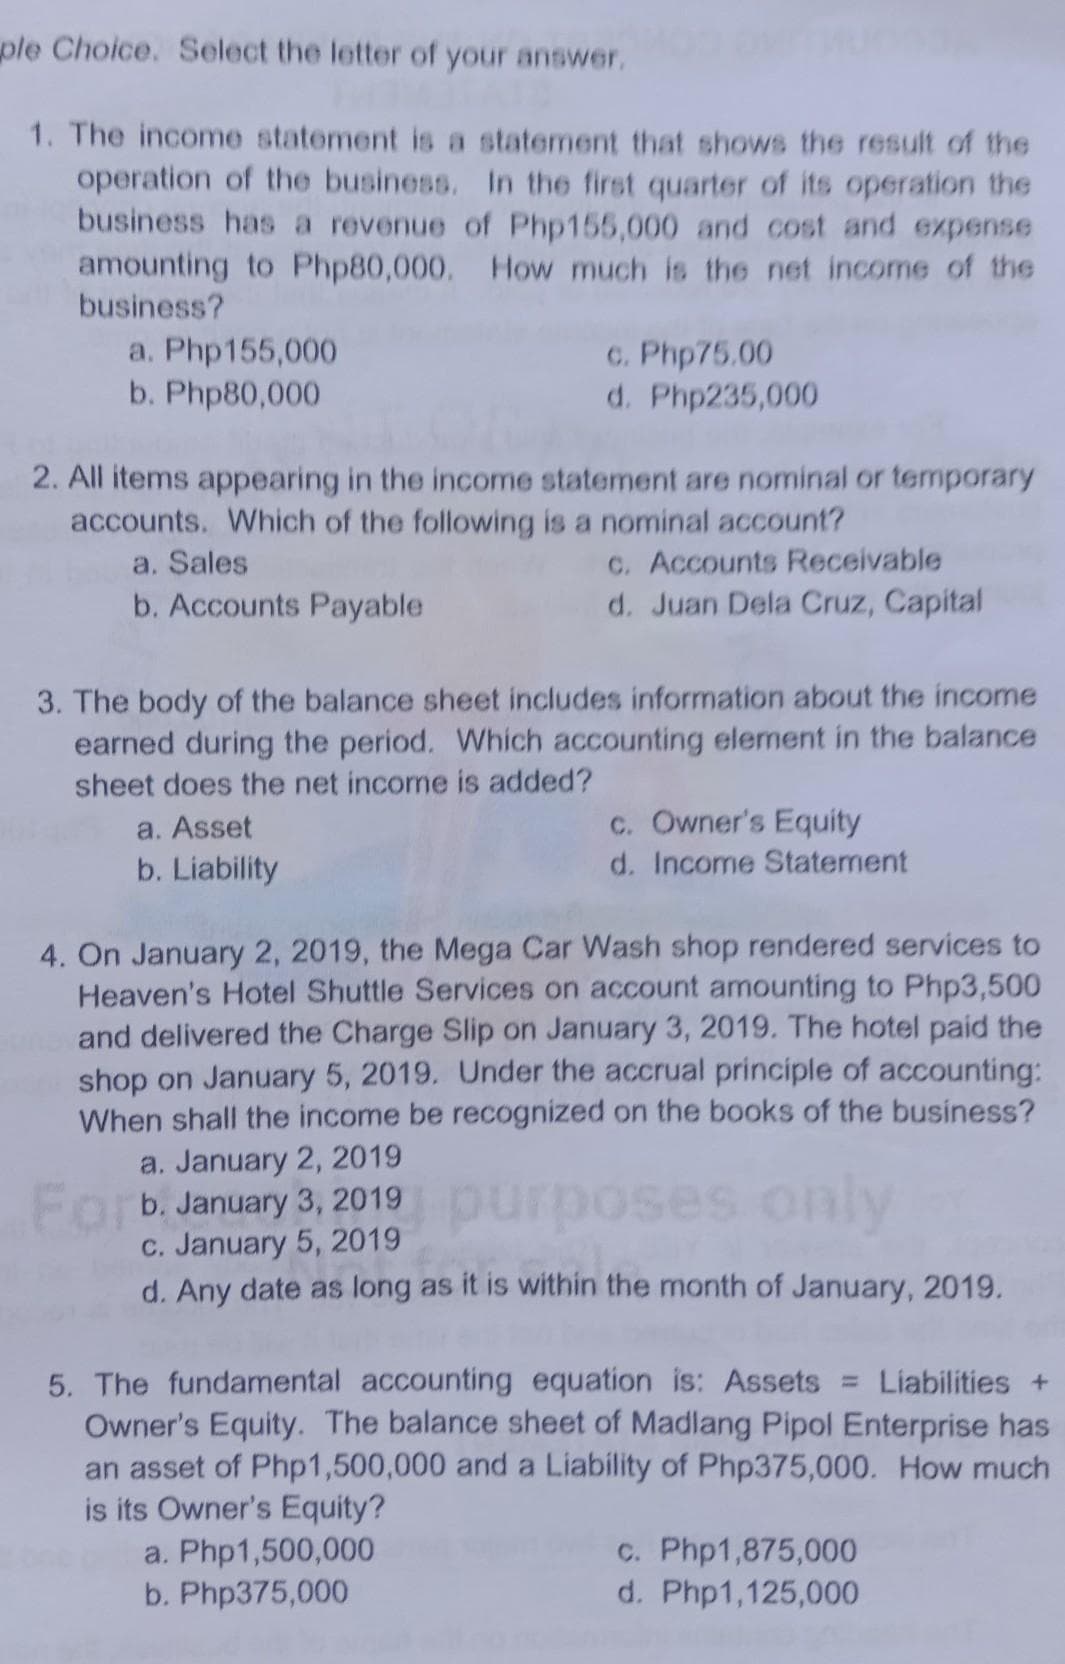 ple Choice. Select the letter of your answer.
1. The income statement is a statement that shows the result of the
operation of the business. In the first quarter of its operation the
business has a revenue of Php155,000 and cost and expense
amounting to Php80,000. How much is the net income of the
business?
a. Php155,000
b. Php80,000
c. Php75.00
d. Php235,000
2. All items appearing in the income statement are nominal or temporary
accounts. Which of the following is a nominal account?
a. Sales
b. Accounts Payable
C. Accounts Receivable
d. Juan Dela Cruz, Capital
3. The body of the balance sheet includes information about the income
earned during the period. Which accounting element in the balance
sheet does the net income is added?
C. Owner's Equity
d. Income Statement
a. Asset
b. Liability
4. On January 2, 2019, the Mega Car Wash shop rendered services to
Heaven's Hotel Shuttle Services on account amounting to Php3,500
and delivered the Charge Slip on January 3, 2019. The hotel paid the
shop on January 5, 2019. Under the accrual principle of accounting:
When shall the income be recognized on the books of the business?
a. January 2, 2019
Forb January 3, 2019 purposes only
C. January 5, 2019
d. Any date as long as it is within the month of January, 2019.
5. The fundamental accounting equation is: Assets = Liabilities +
Owner's Equity. The balance sheet of Madlang Pipol Enterprise has
an asset of Php1,500,000 and a Liability of Php375,000. How much
is its Owner's Equity?
a. Php1,500,000
b. Php375,000
c. Php1,875,000
d. Php1,125,000
